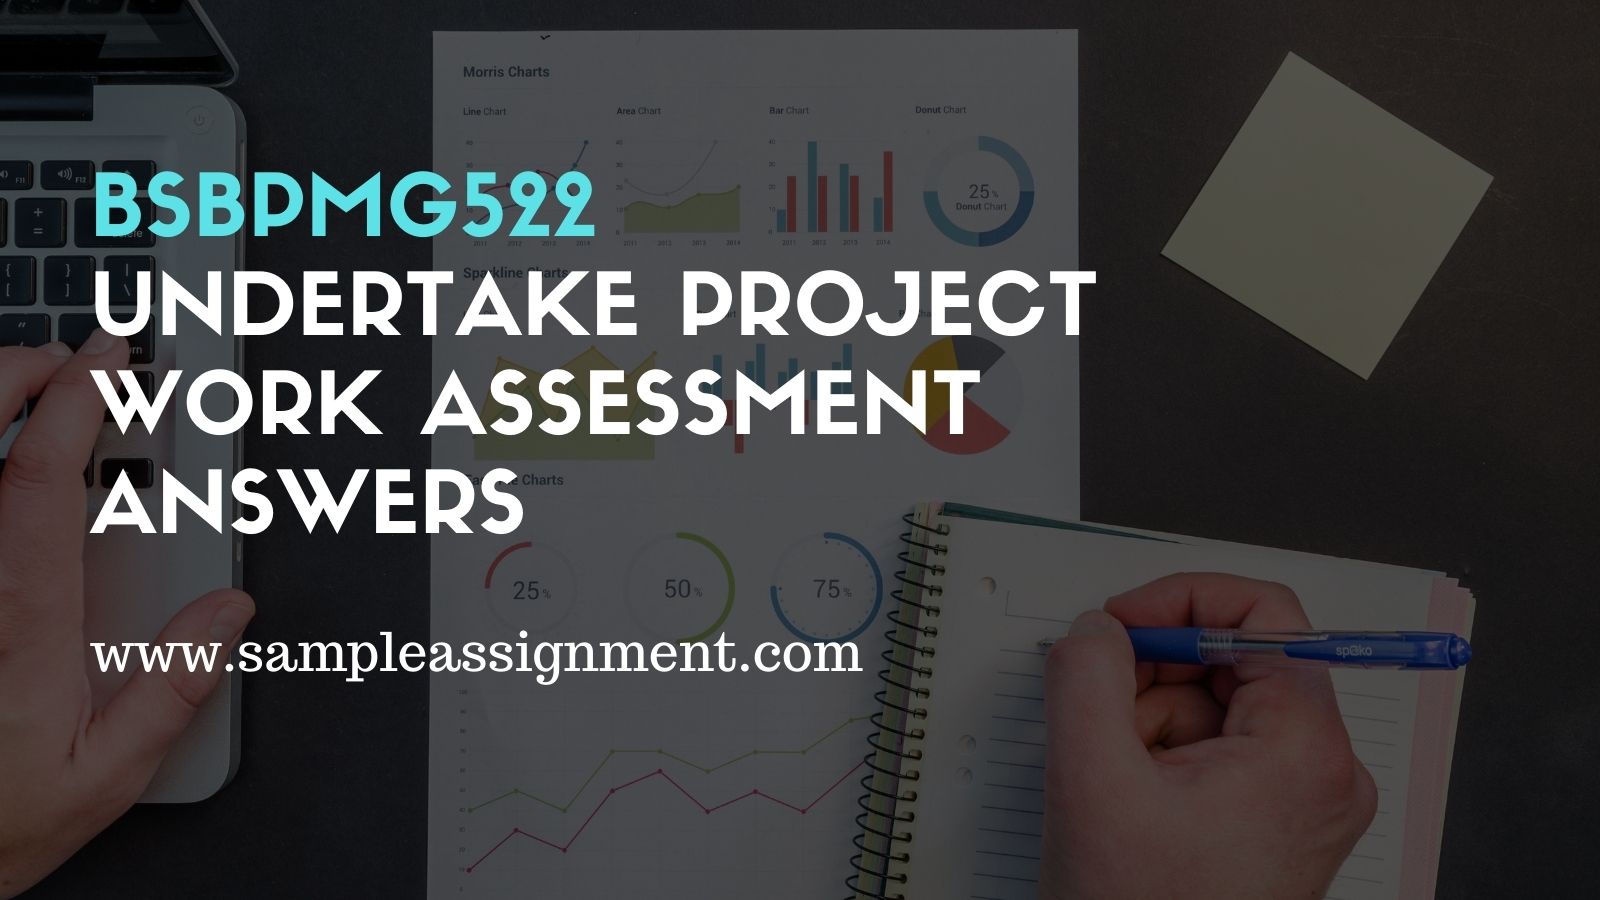 BSBPMG522 Undertake Project Work Assessment Answers At Your Fingertips